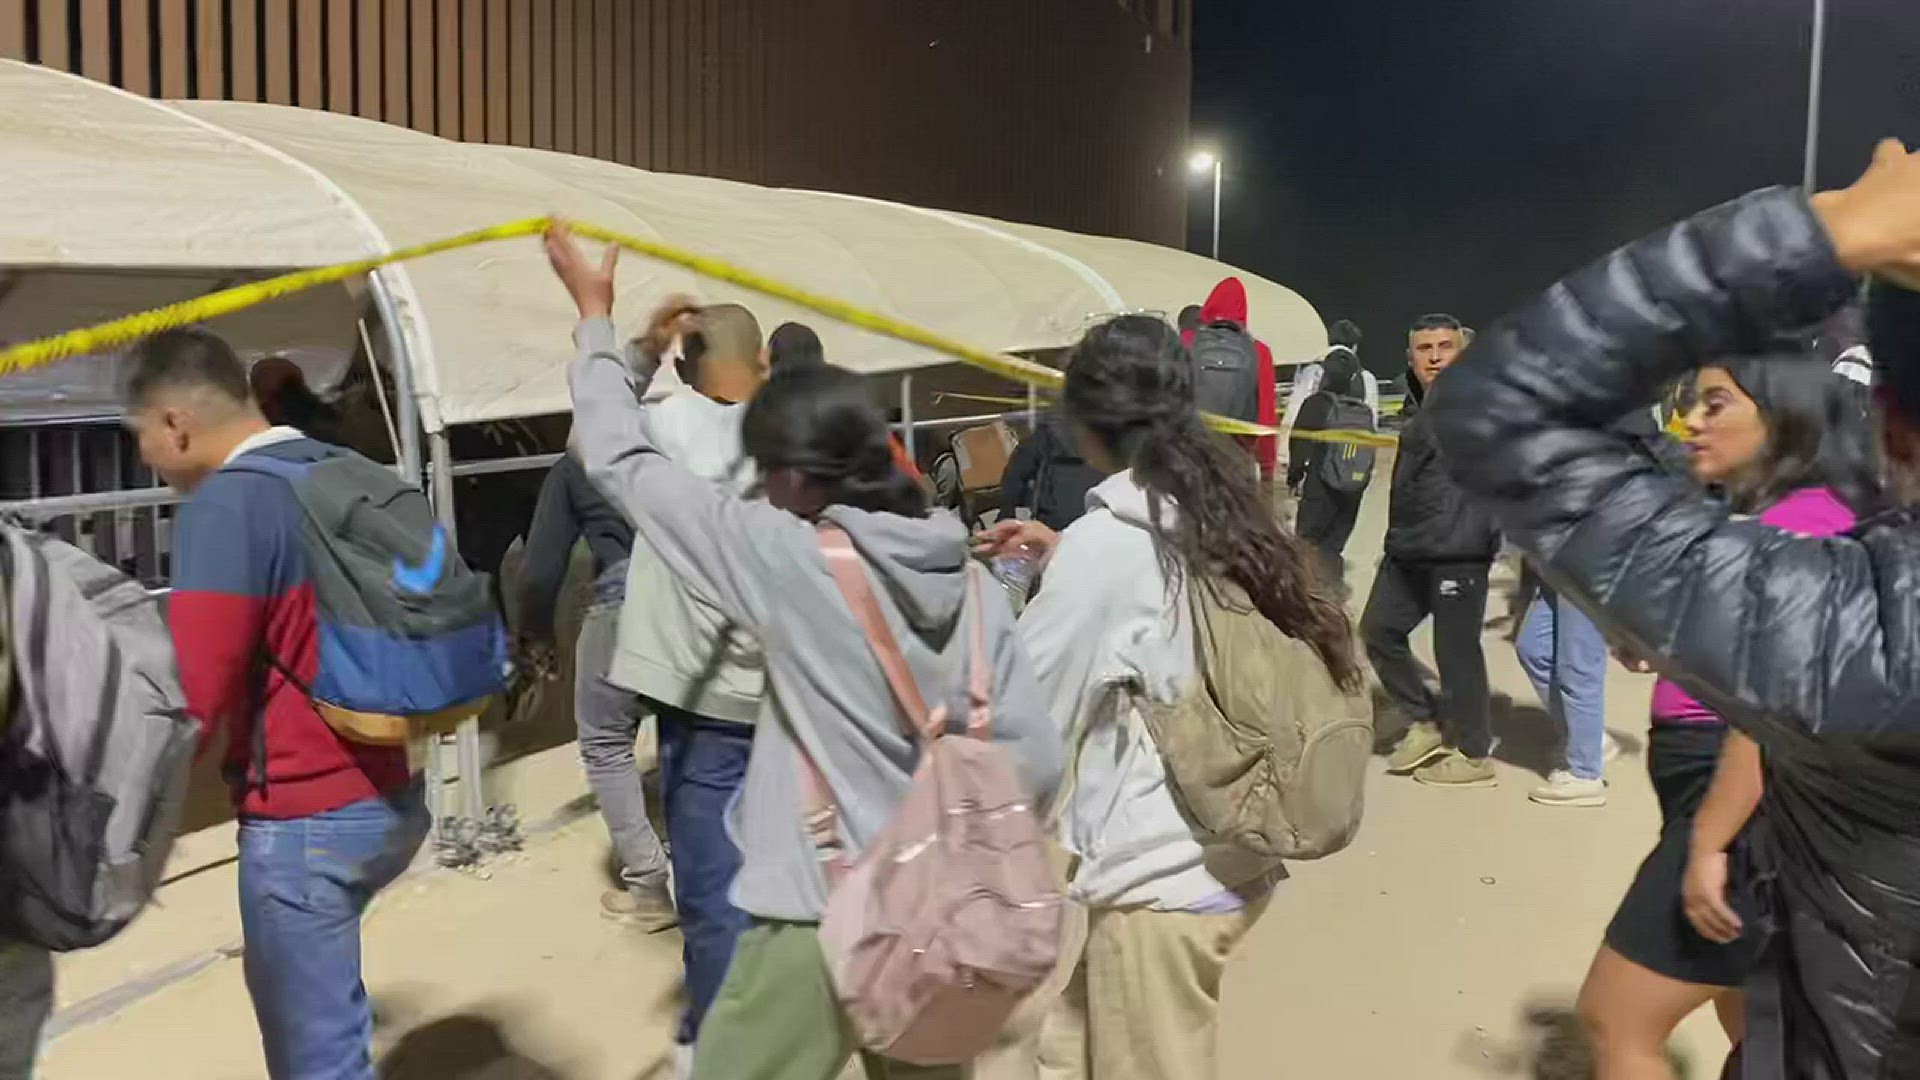 12News shares footage from the border crossing in Yuma on Thursday evening.